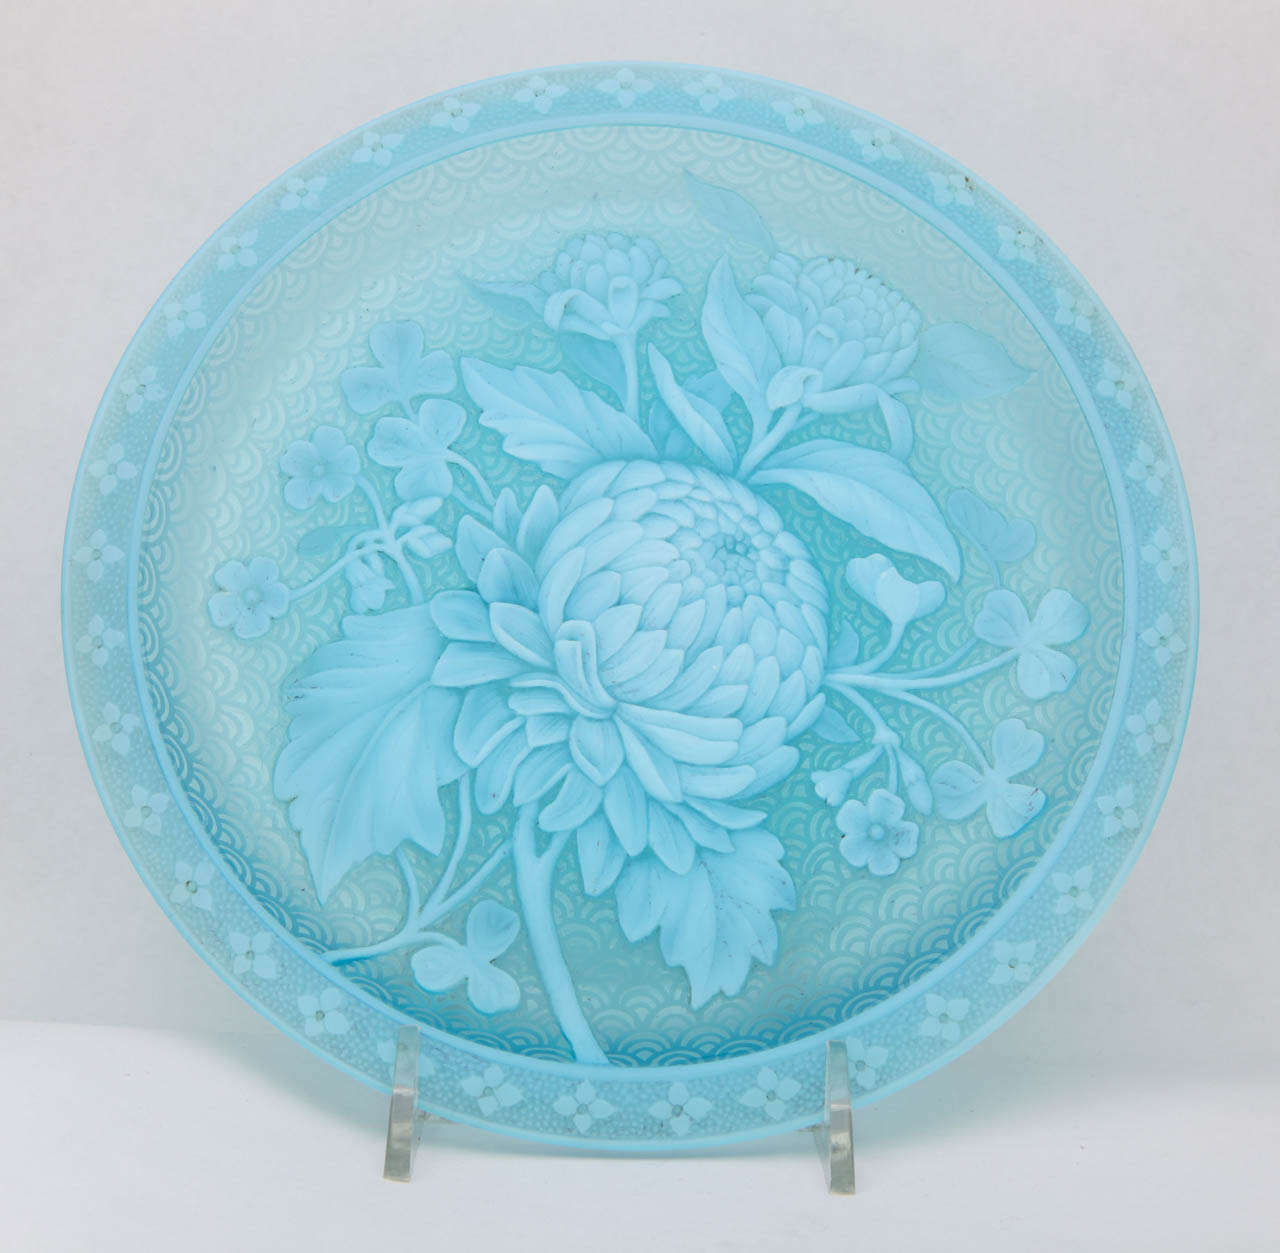 A rare unmarked Thomas Webb & Sons blue and white cameo glass plate decorated with chrysanthemums, acid cut background